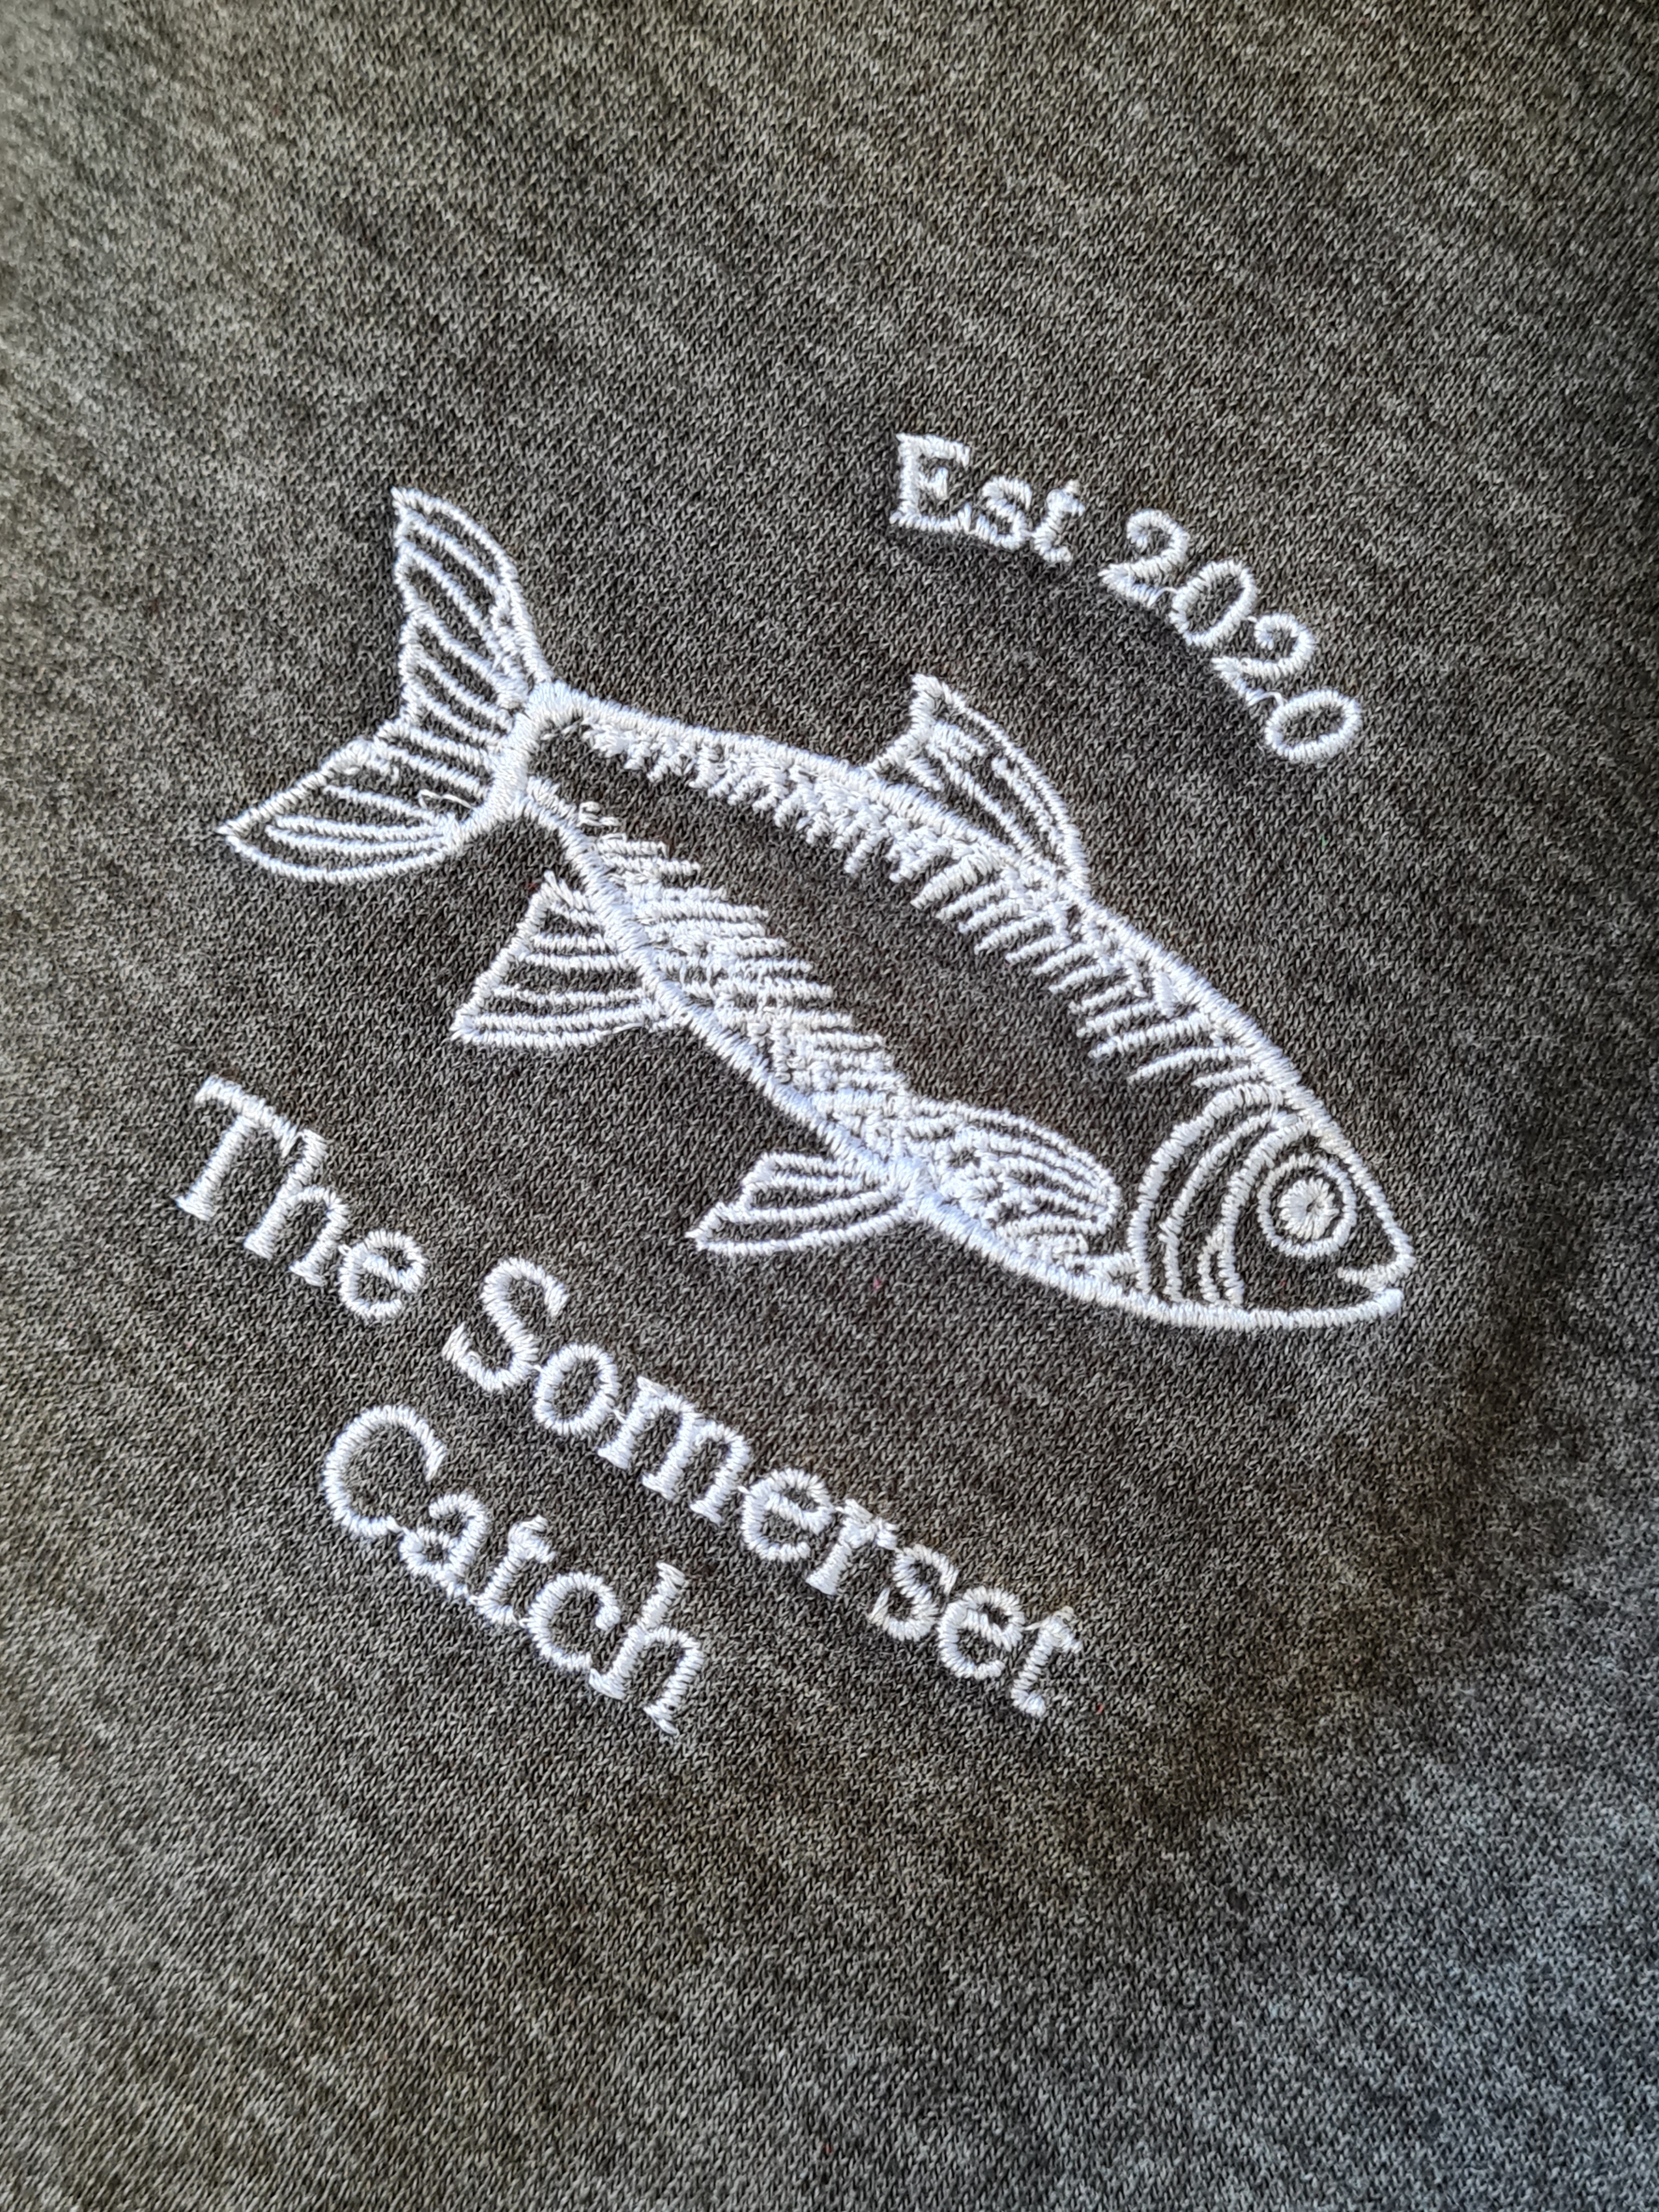 The Somerset Catch